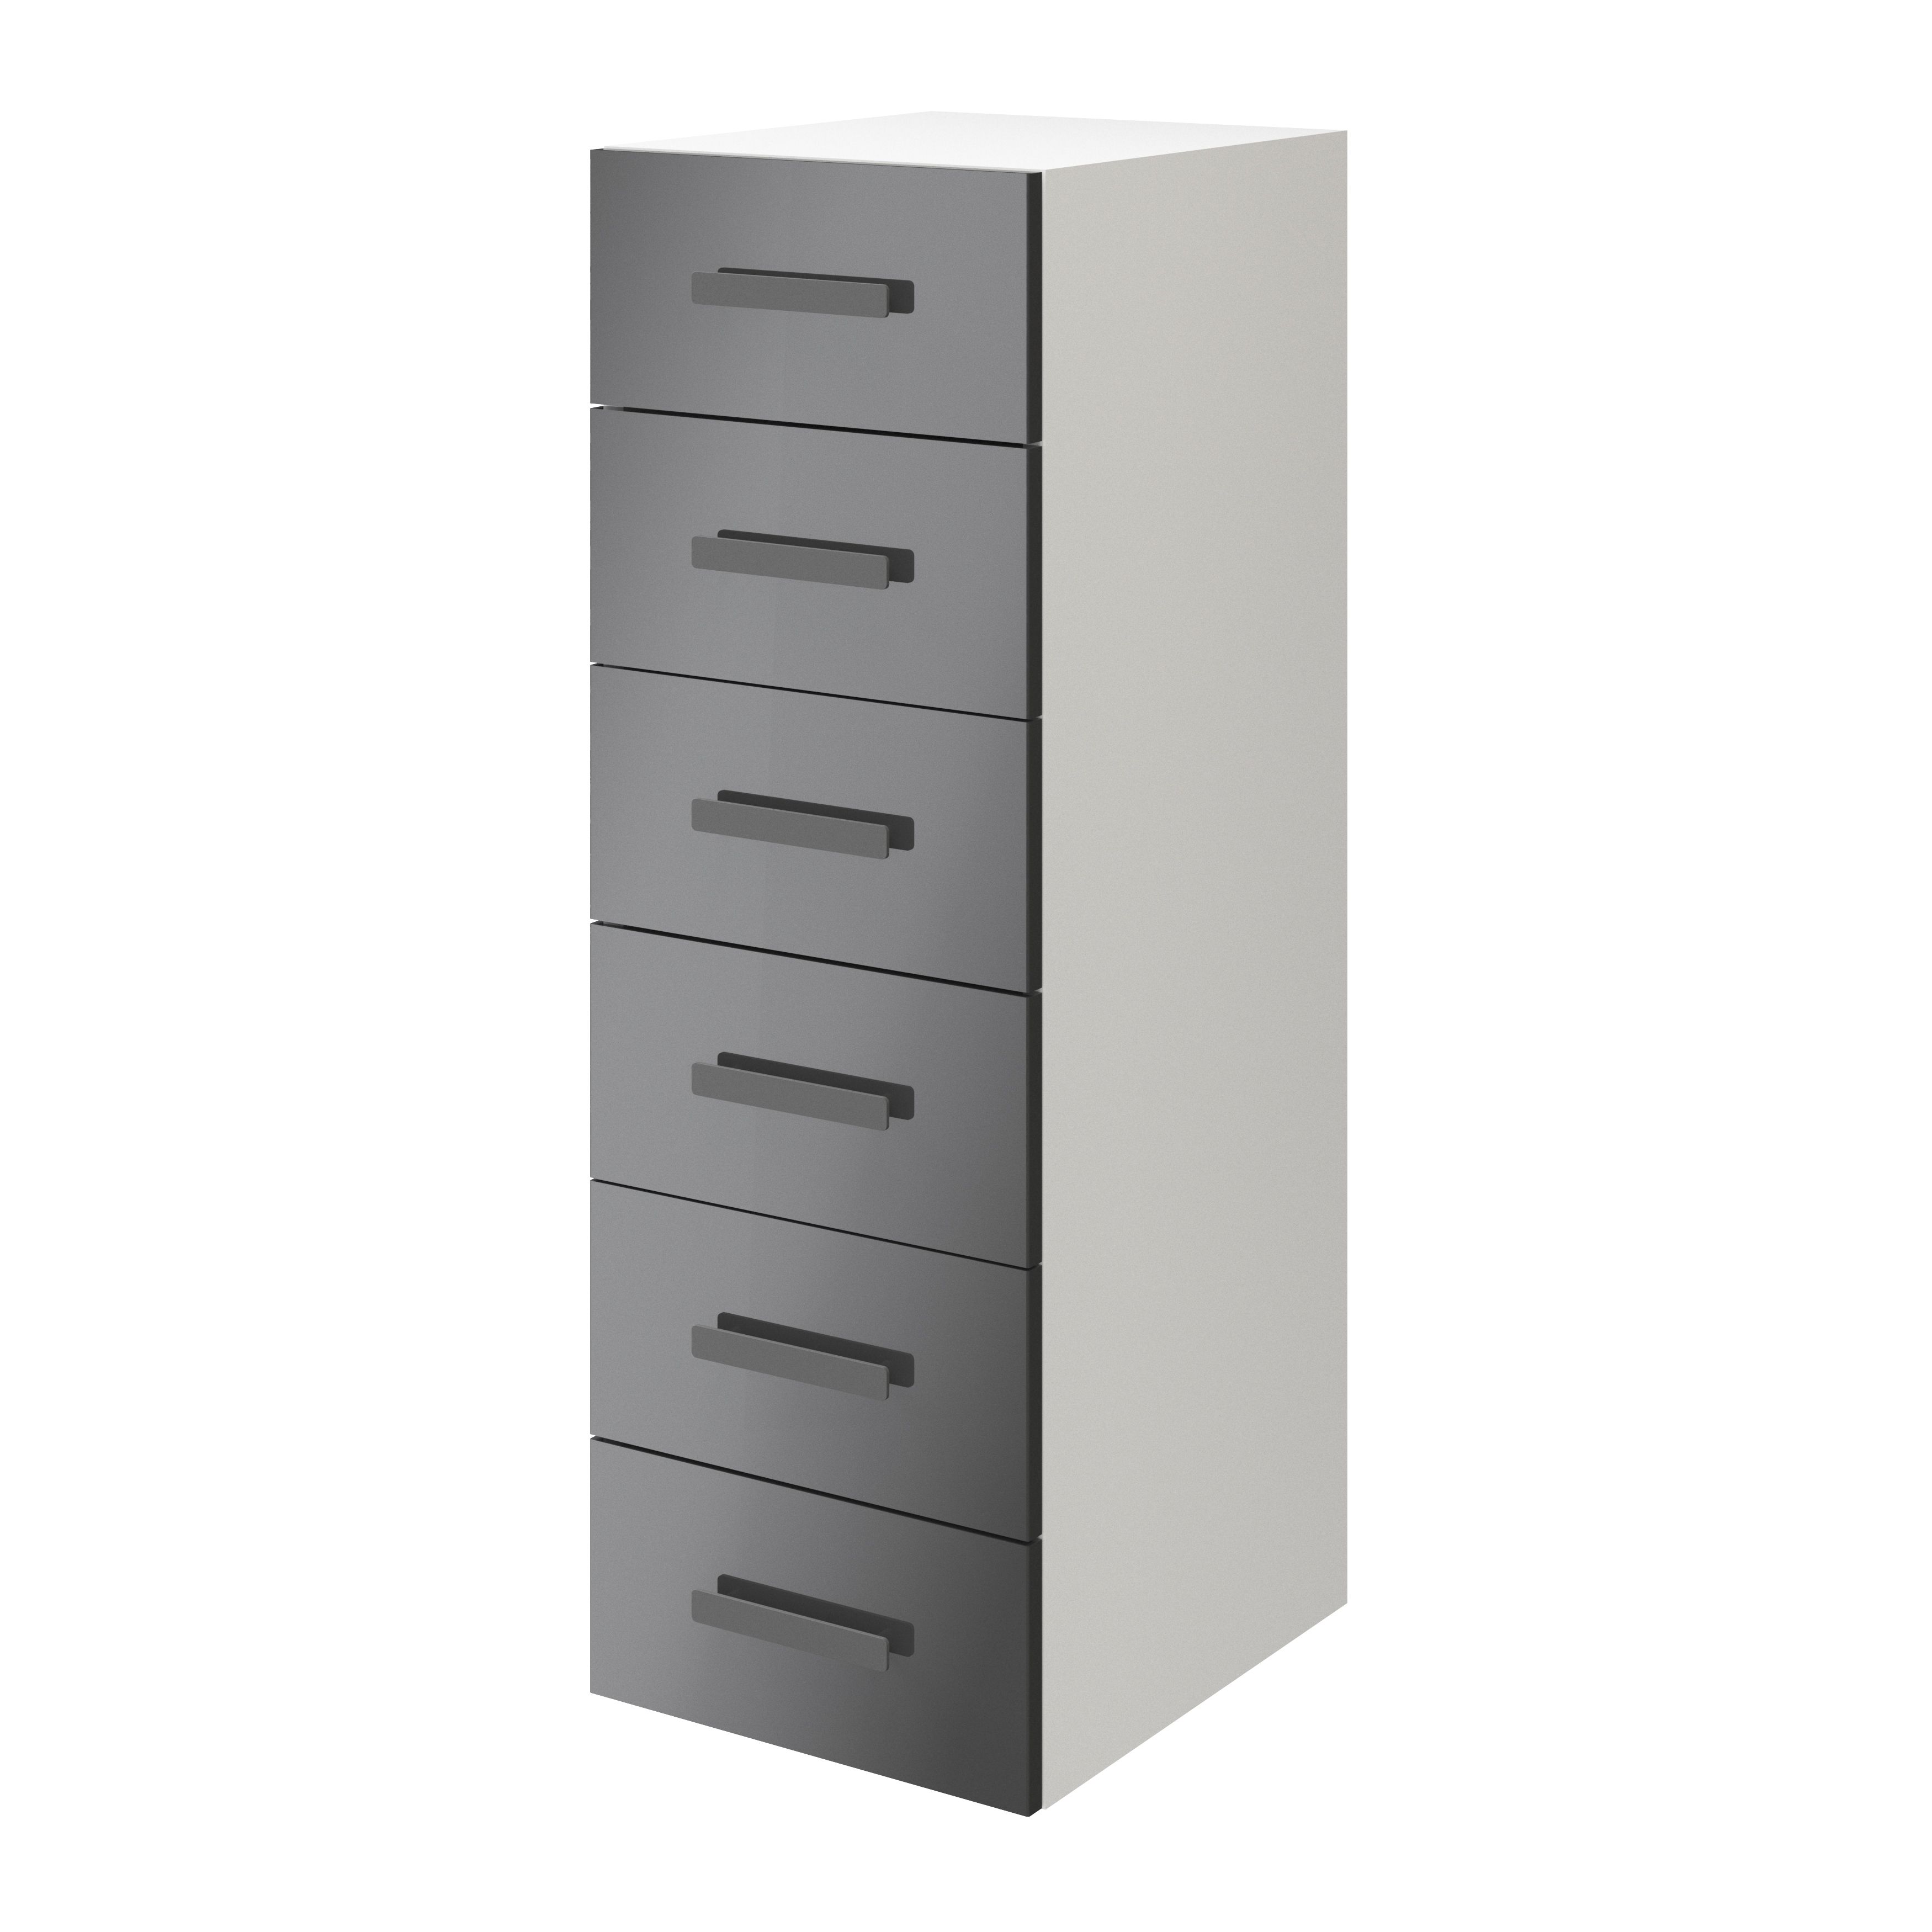 Atomia Freestanding Gloss anthracite & white 6 Drawer Chest of drawers (H)1125mm (W)375mm (D)450mm